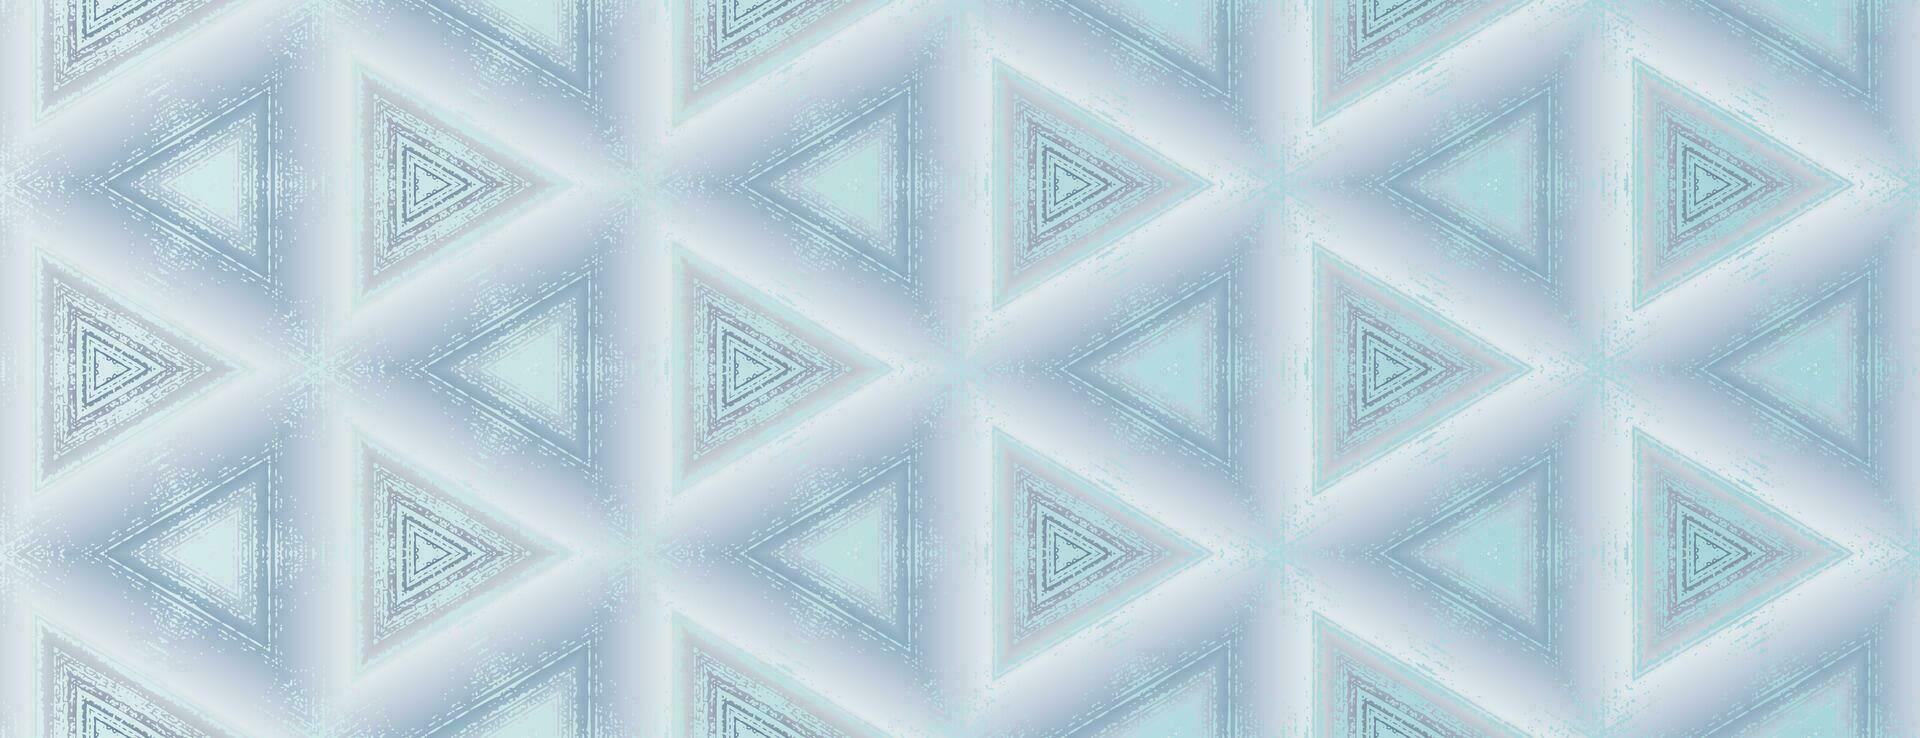 Abstract light blue, white and gray textured triangle geometric ornament for design, poster, banner, packaging design, wrapping paper, wallpaper, background. Vector illustration.